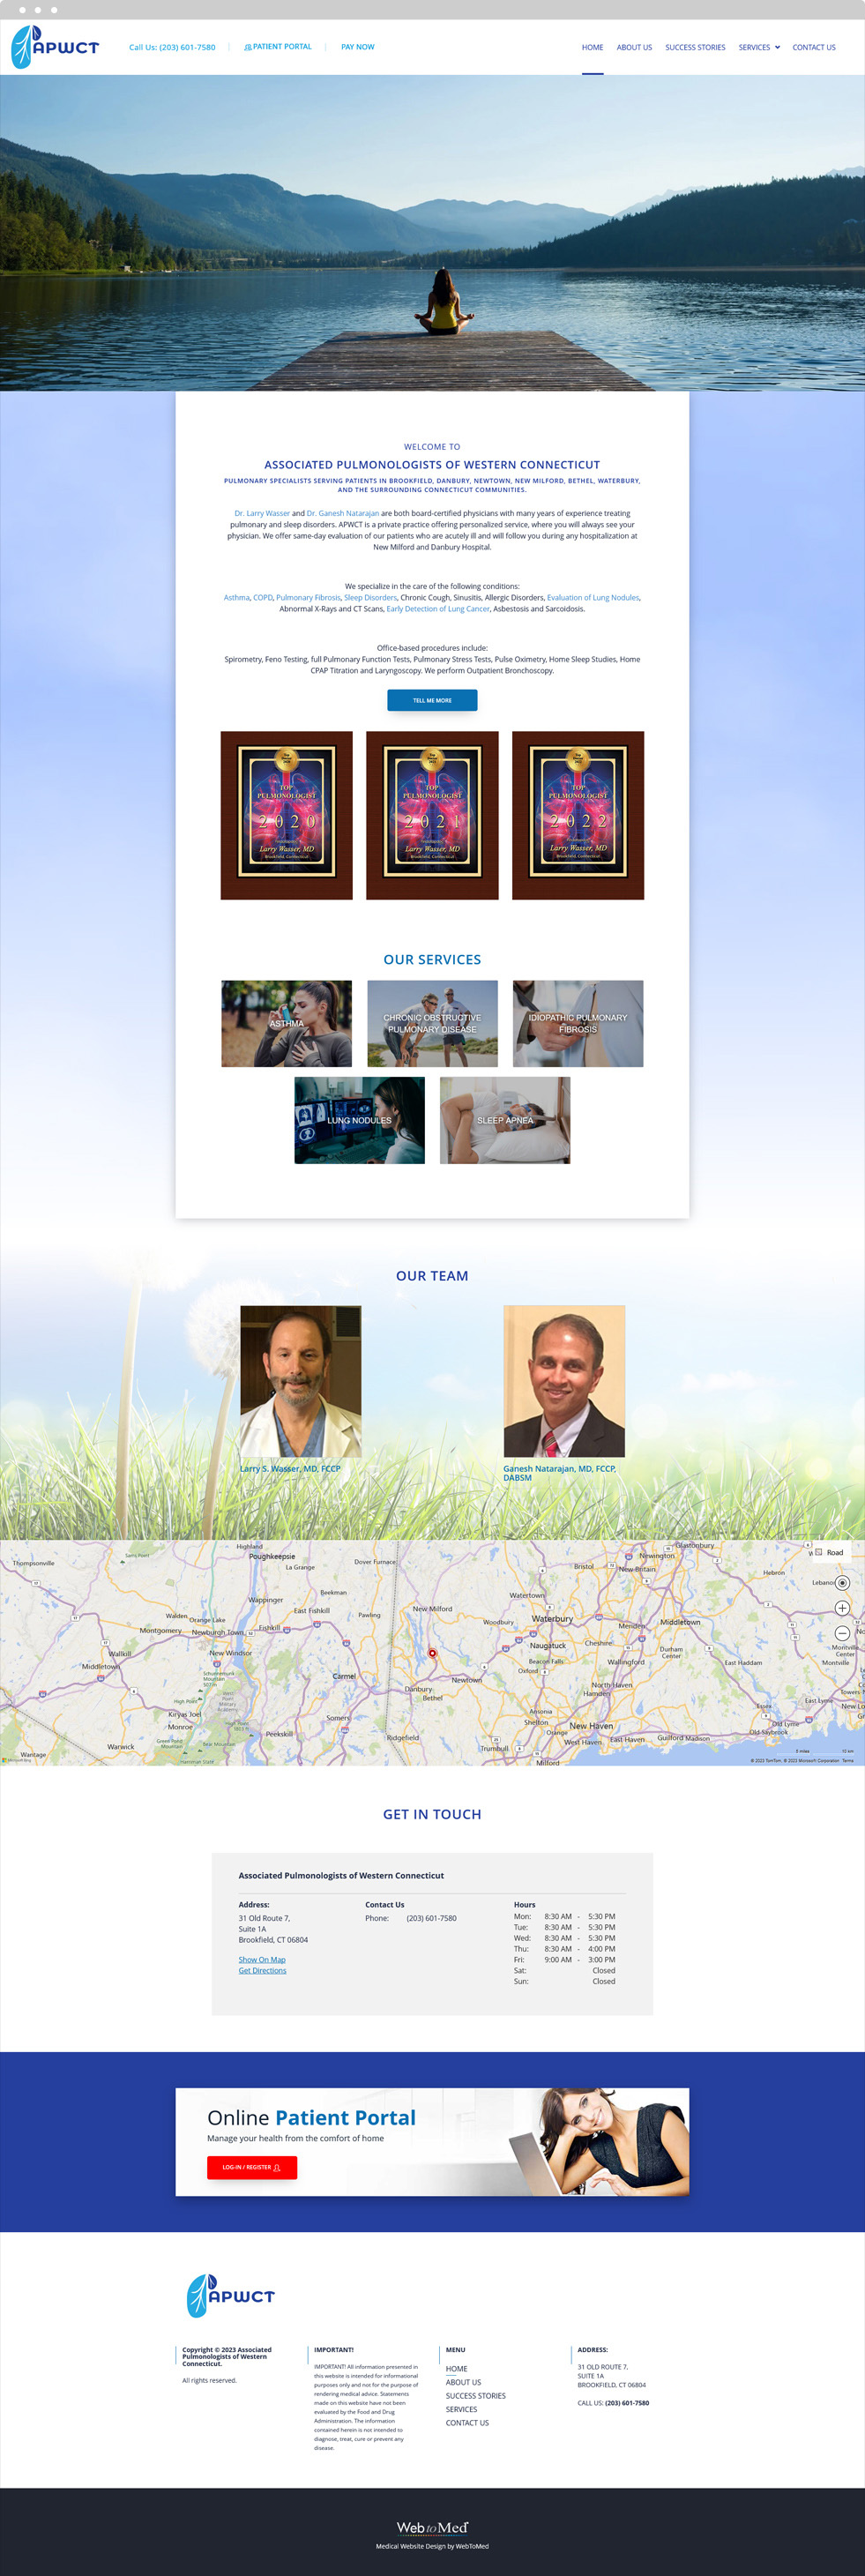 Allergy Website Design - Associated Pulmonologists of Western Connecticut - Homepage